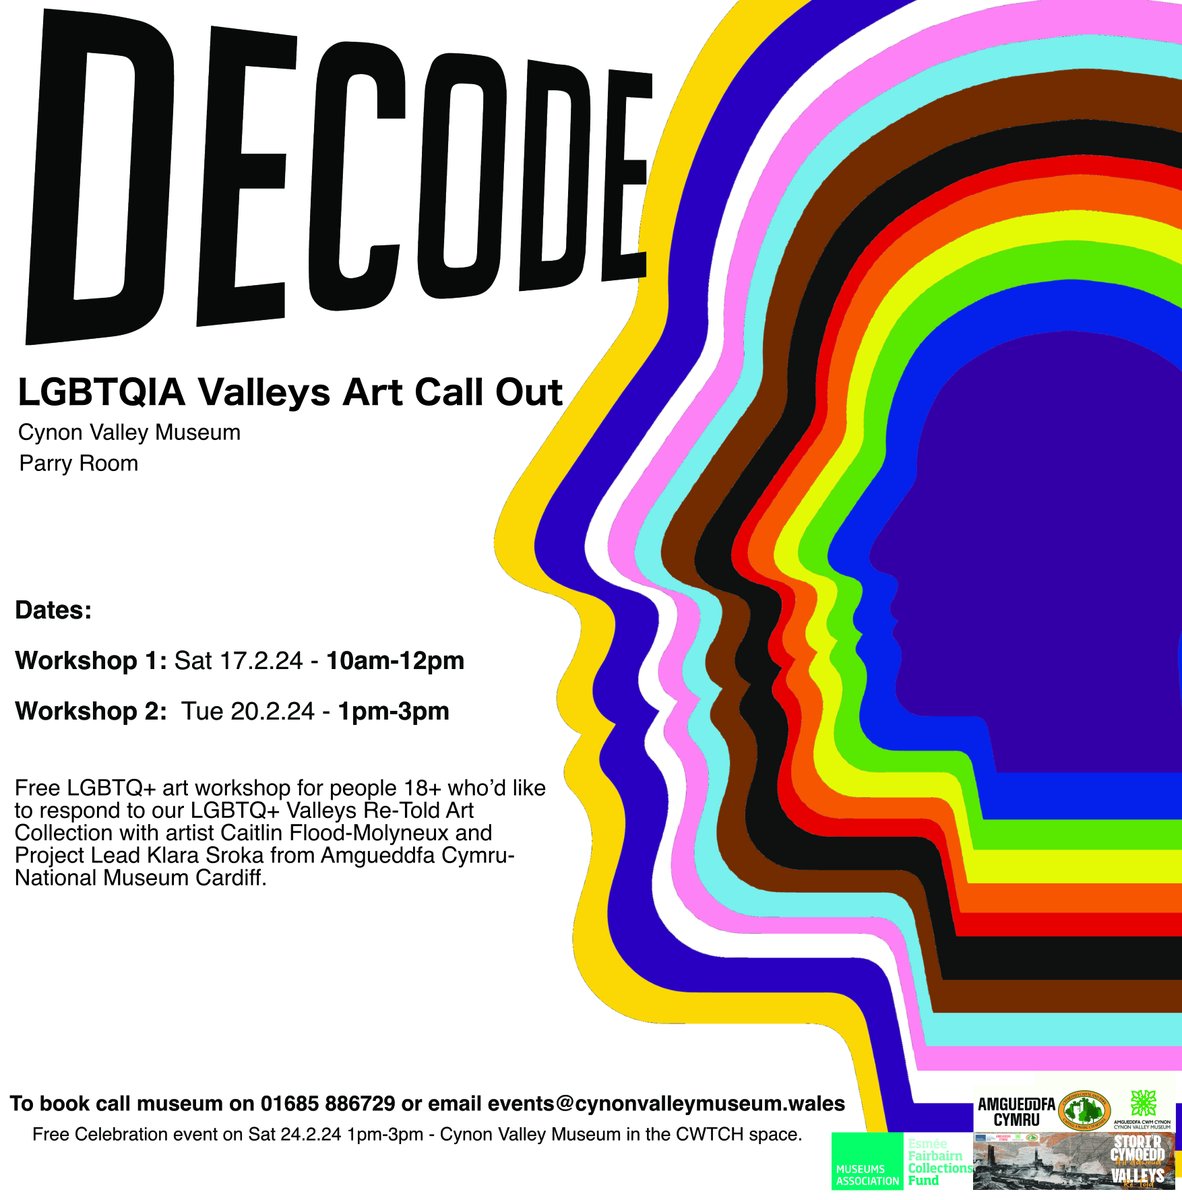 Free LGBTQ+ art workshop in @cynonvalleymus for people 18+ who’d like to respond to our LGBTQ+ Valleys Re-Told Art Collection!

With artist Caitlin Flood-Molyneux and Project Lead Klara Sroka from @Museum_Cardiff 

Sat 17.2.24 - 10am-12pm
Tue 20.2.24 - 1pm-3pm

#ValleysRetold